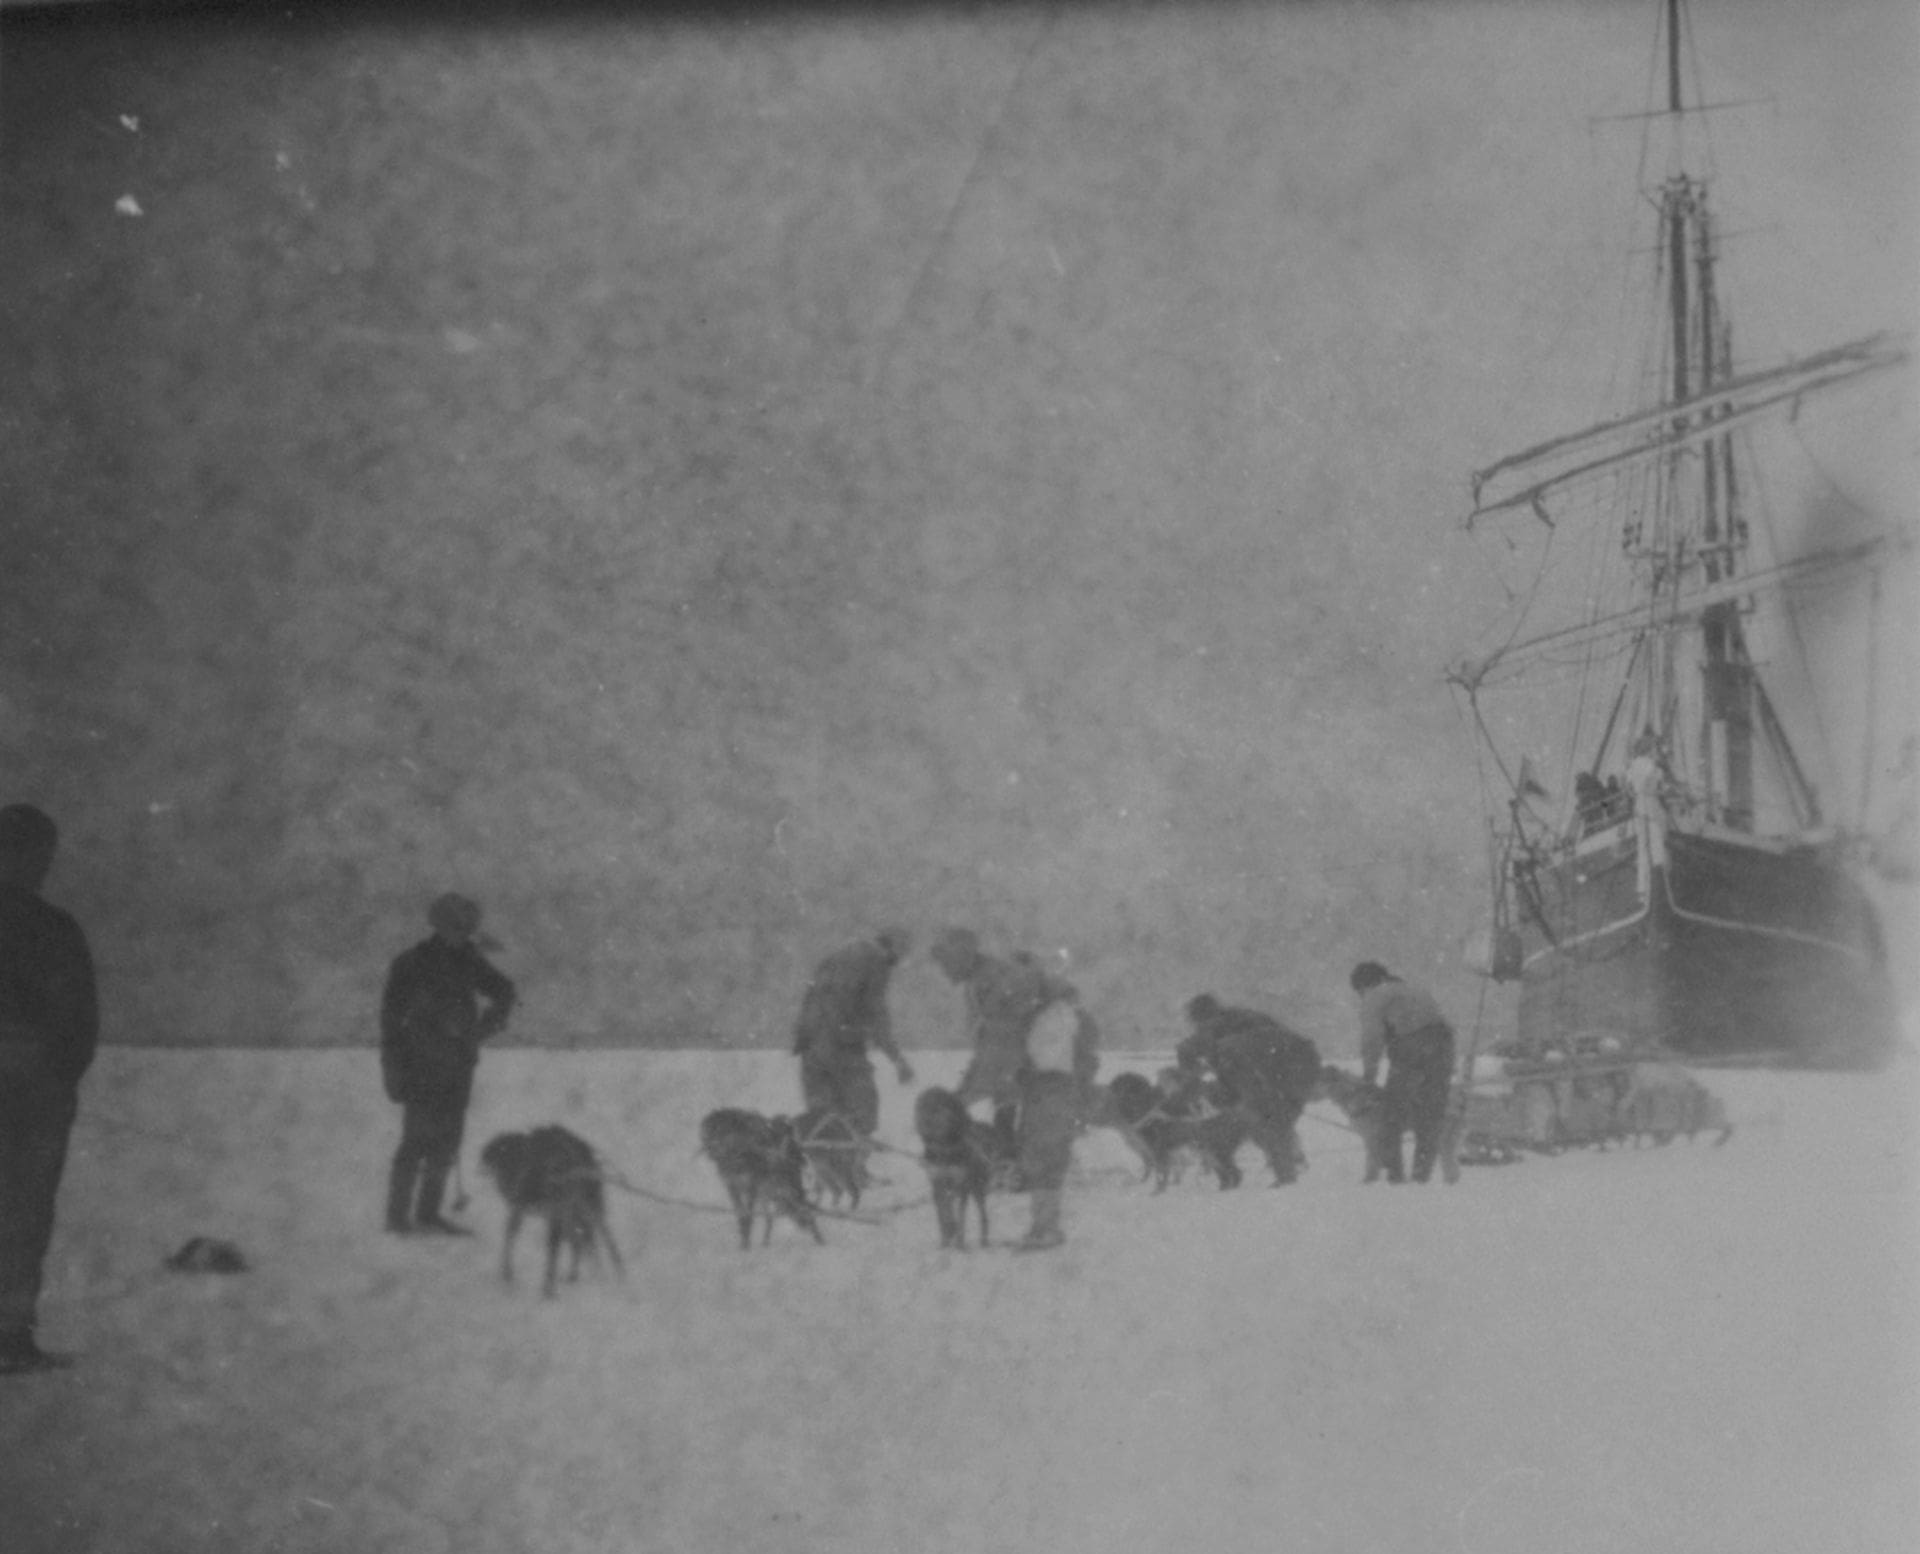 Ross Sea Party members Aeneas MacKintosh, Reverend Arnold Spencer-Smith and Harry Ernest Wild starting on a depot laying journey to the Bluff, 1 January 1915.